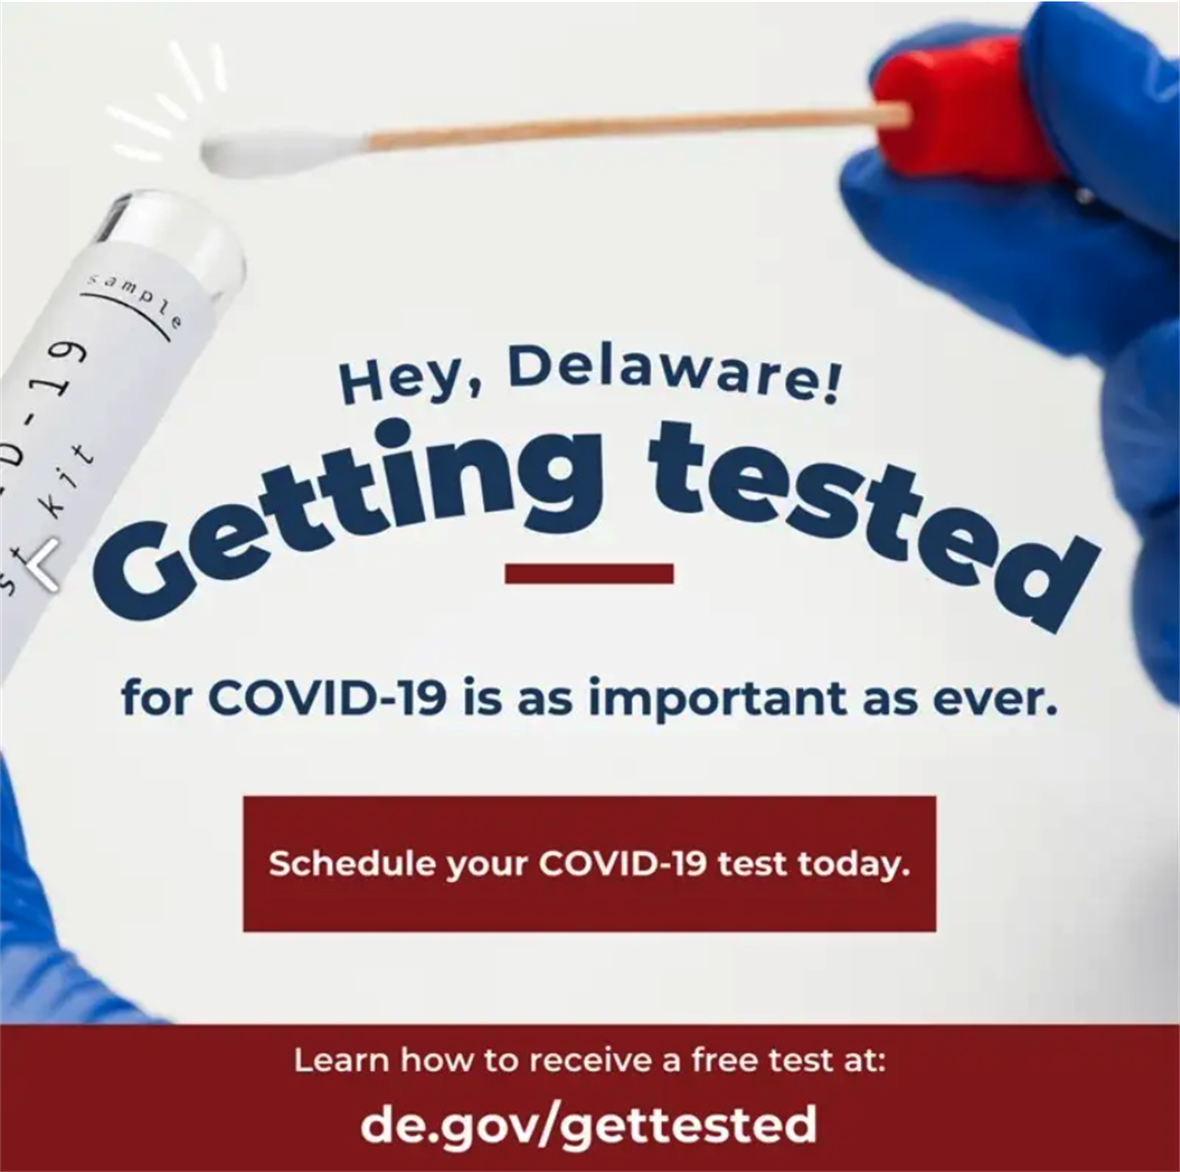 Ad that reads "Hey, Delaware! Getting tested for COVID-19 is as important as ever."